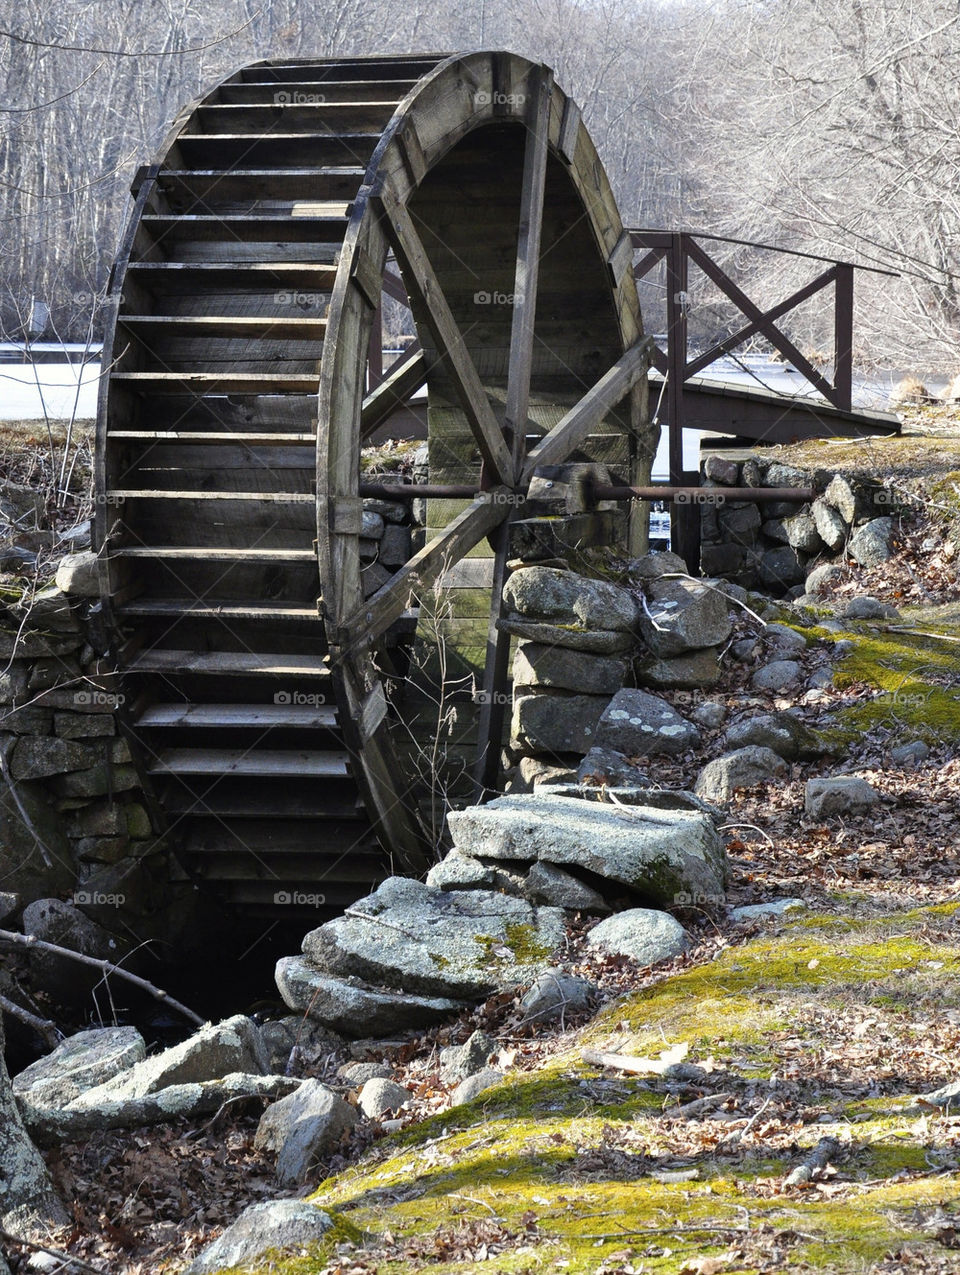 Water wheel at rest